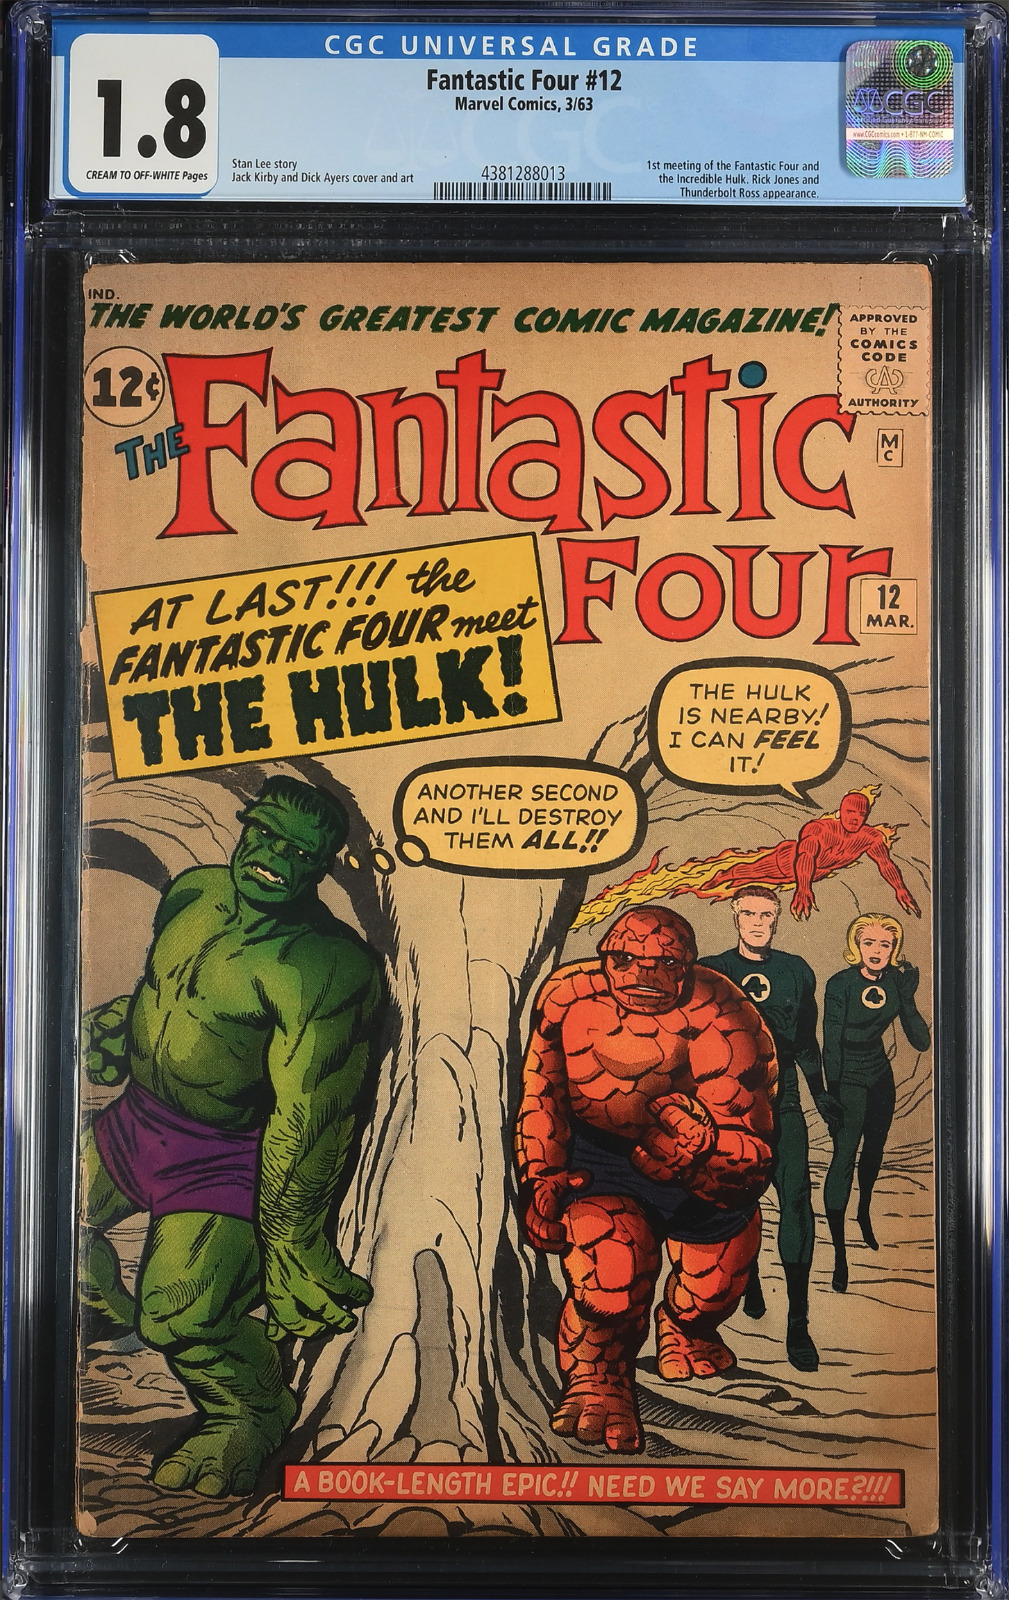 THE FANTASTIC FOUR #12 MARCH 1963 - CGC 1.8-SILVER AGE KEY HULK and THING